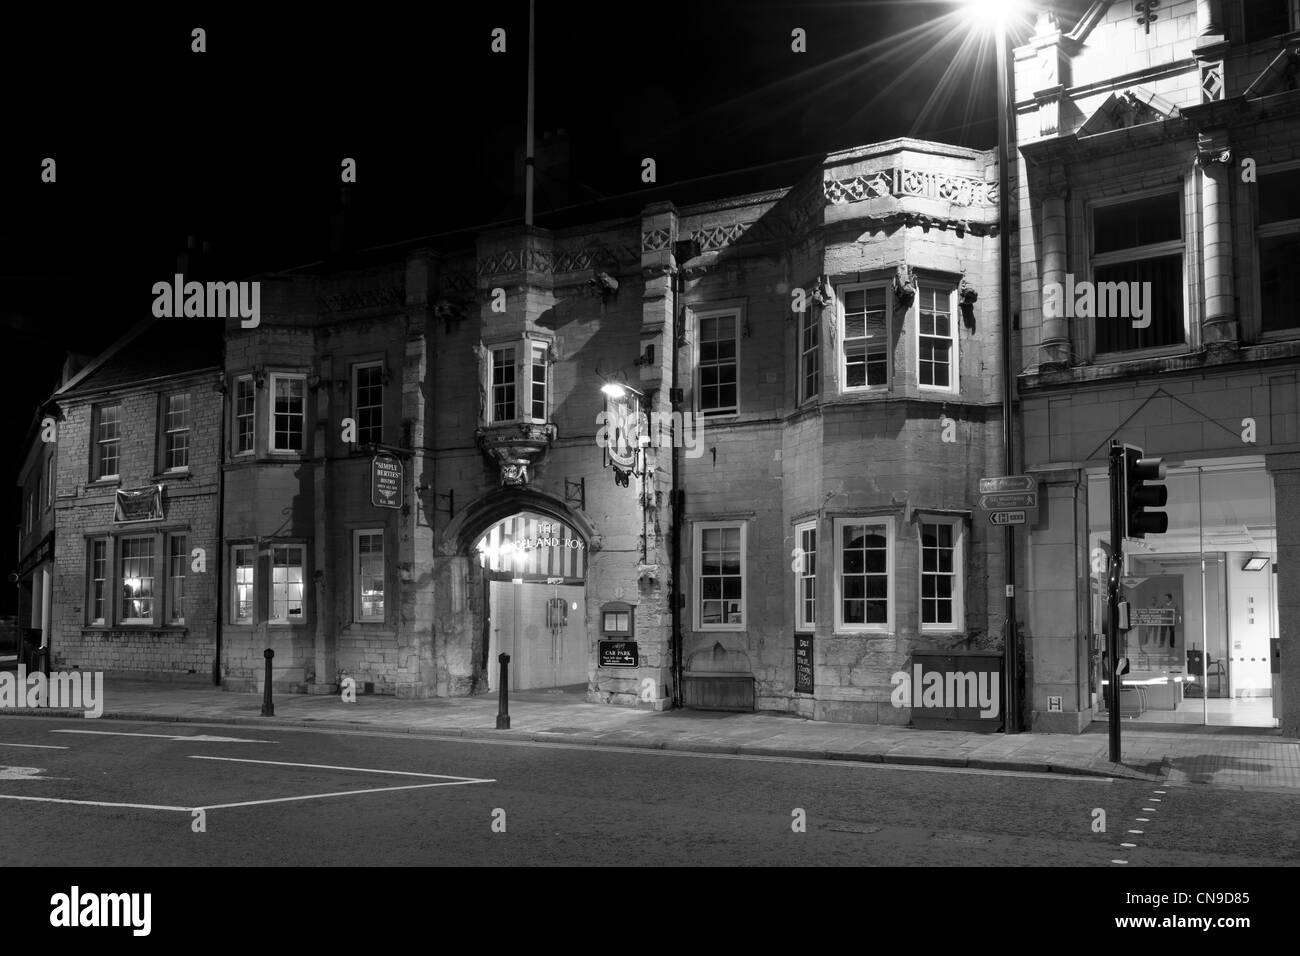 Angel and Royal Hotel, High Street, Grantham, Lincolnshire, England. Stock Photo